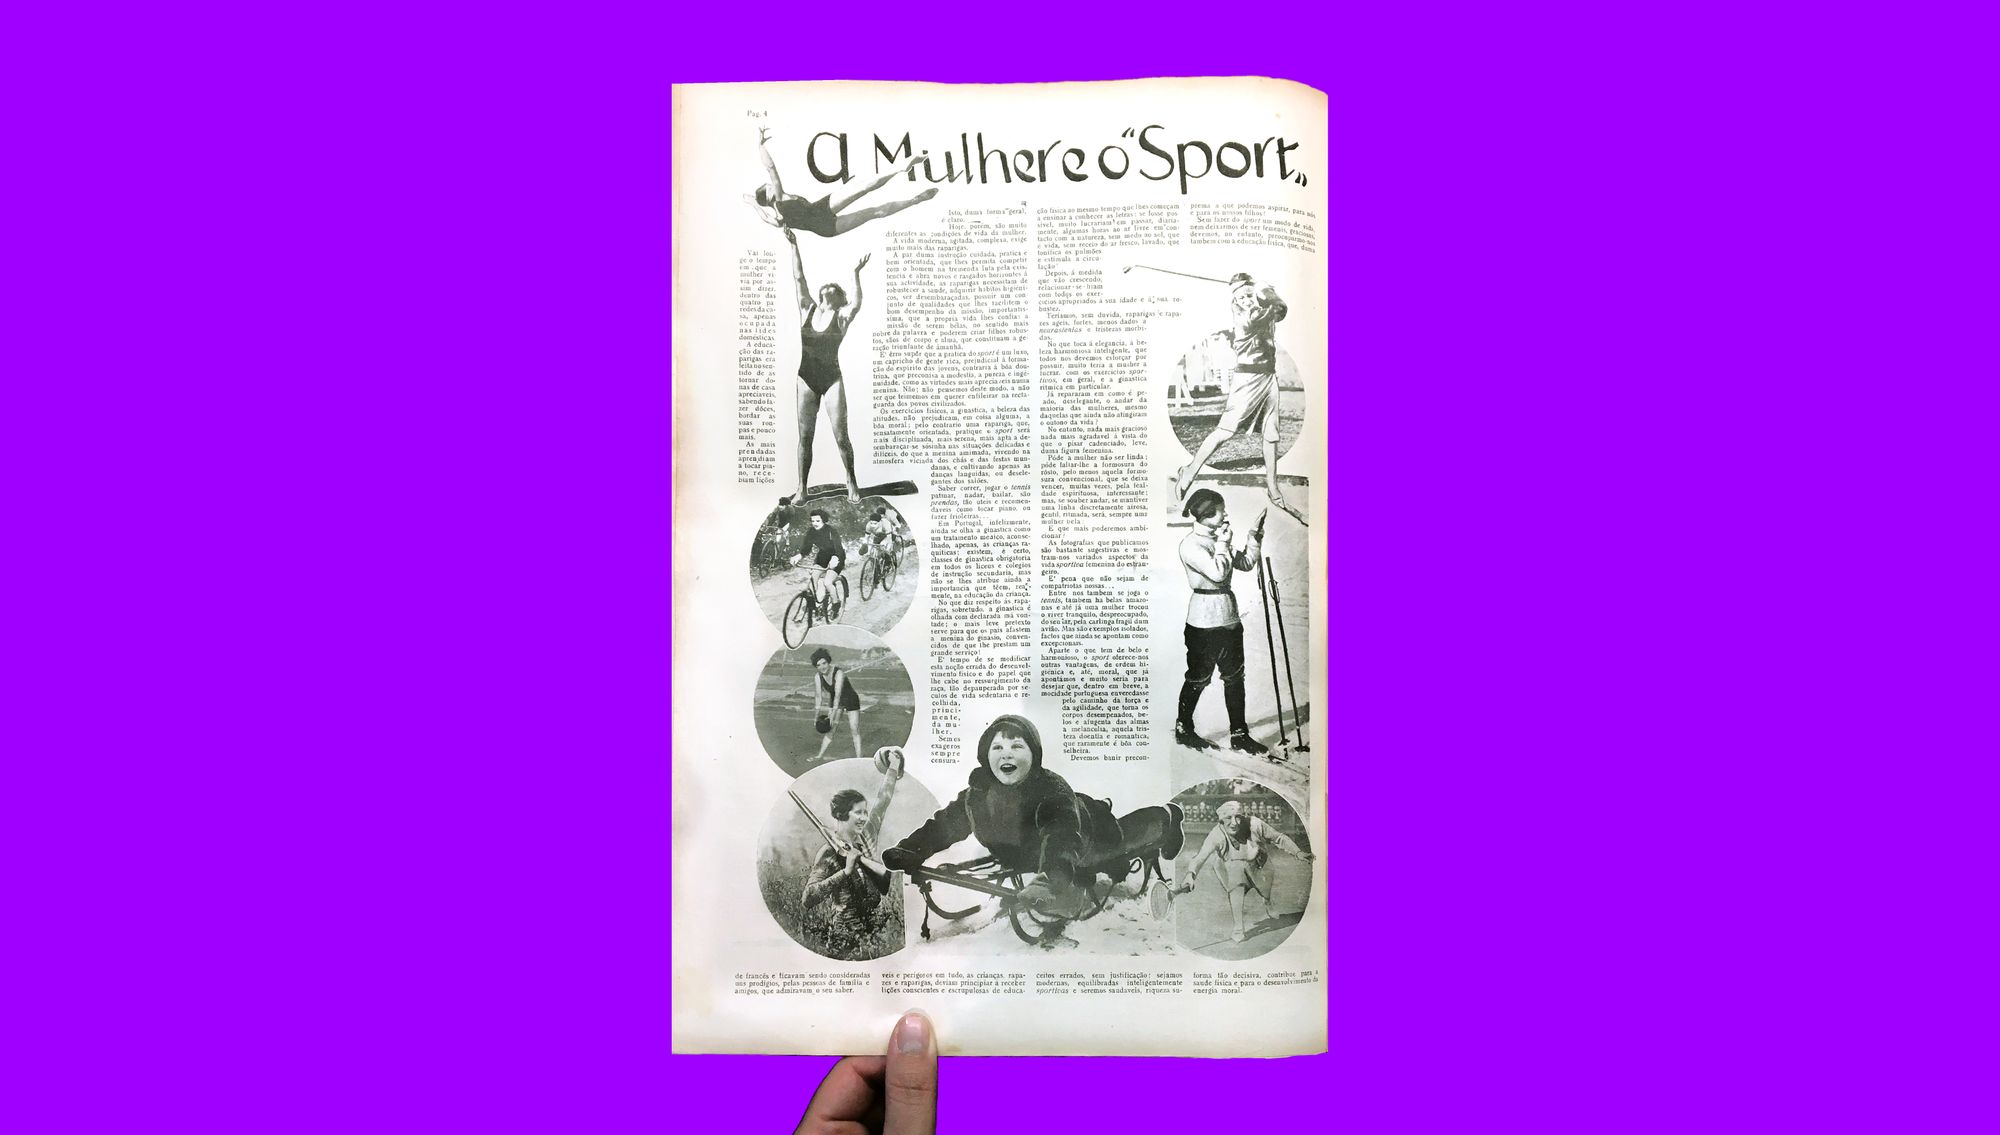 A page from an issue of Modas & Bordados in 1929, with the article “Women and Sport” showing women engaged in different physical activities